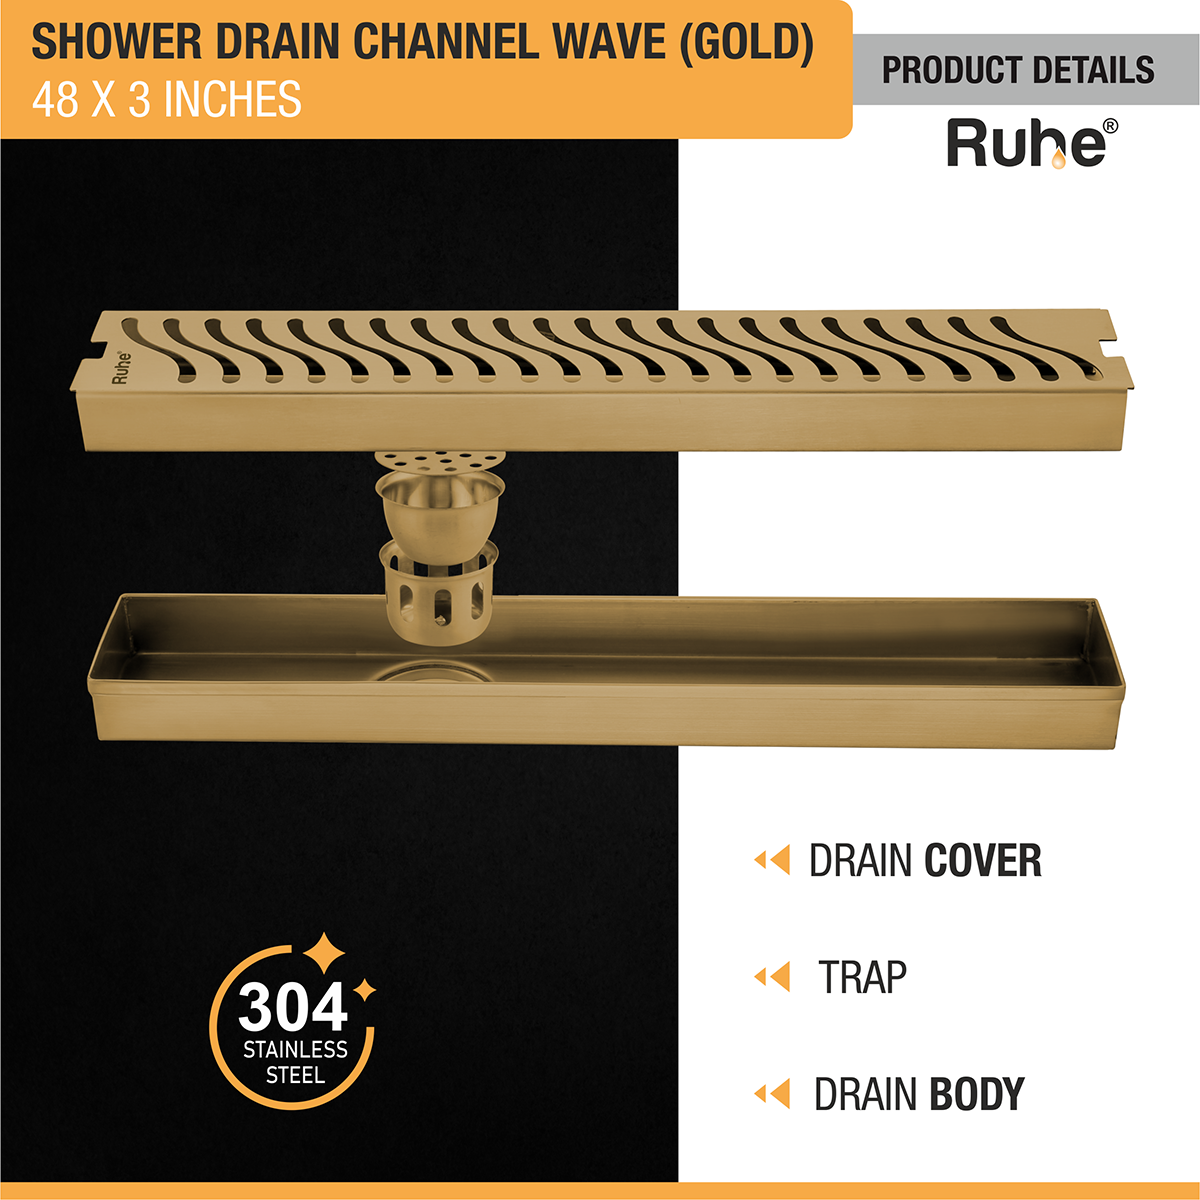 Wave Shower Drain Channel (48 x 3 Inches) YELLOW GOLD product details